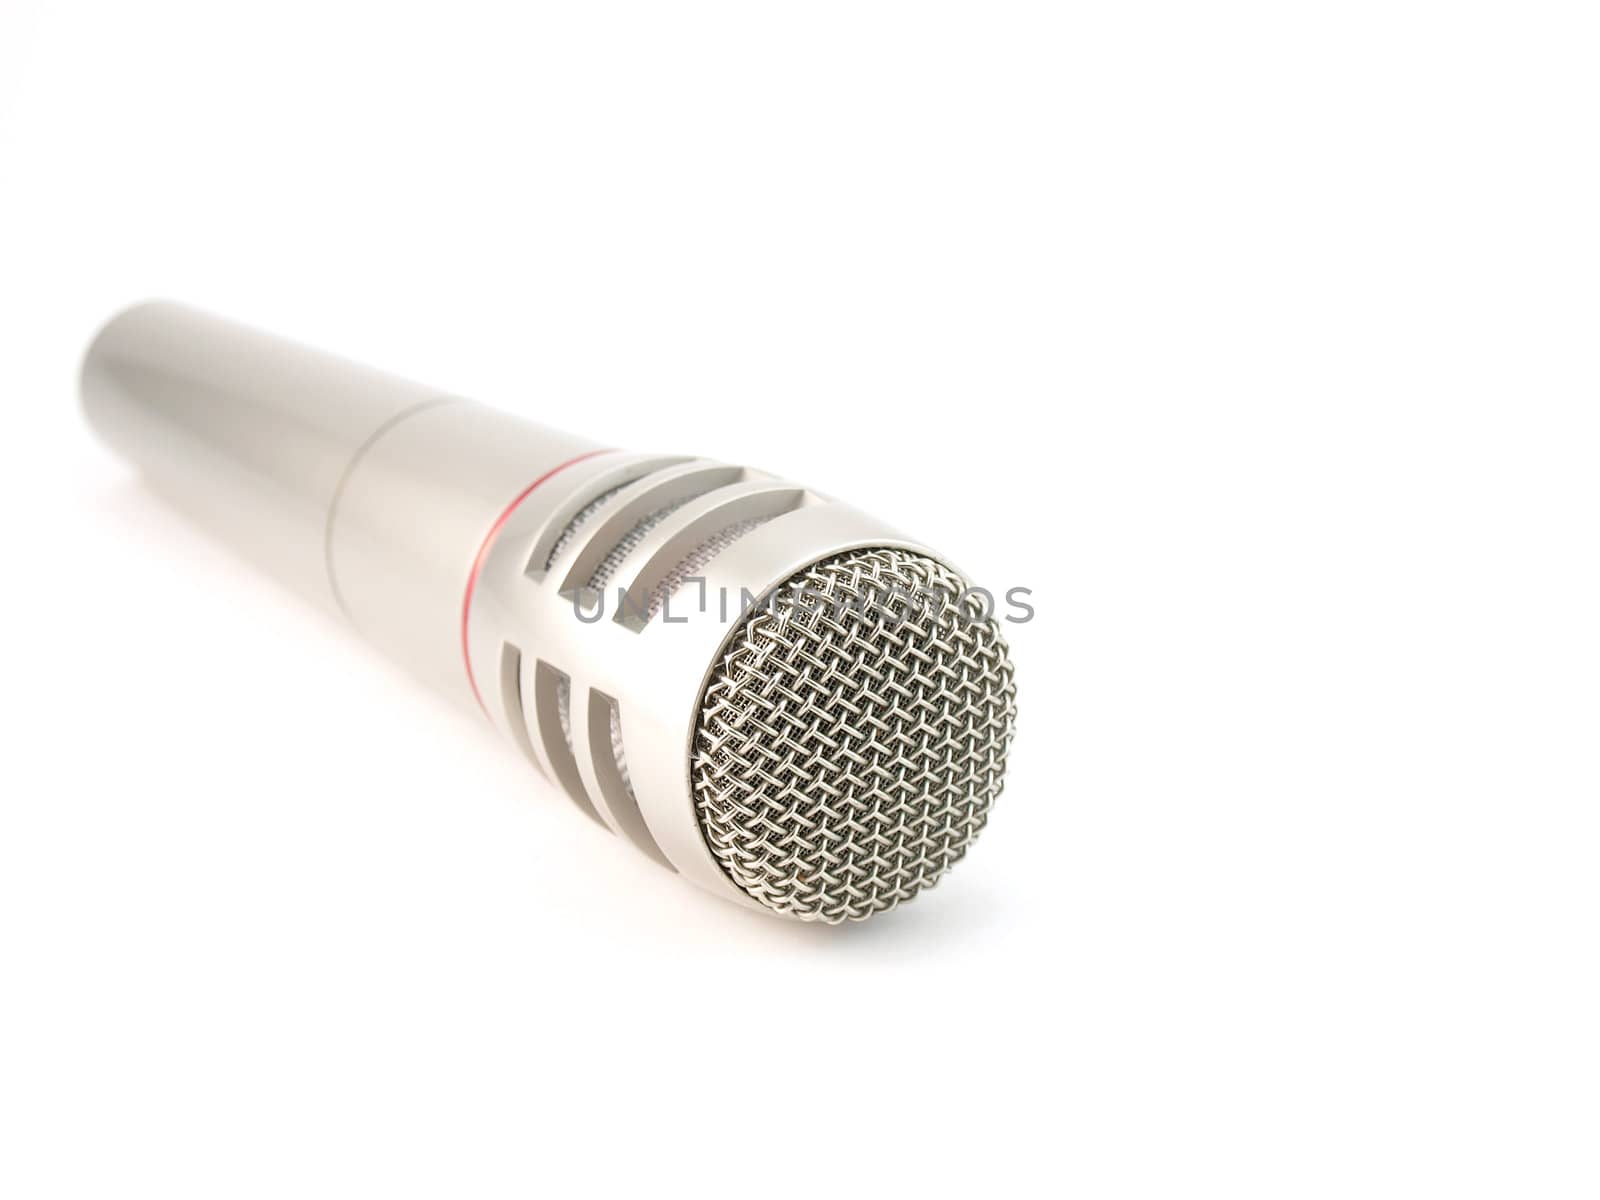 Microphone over white by sergpet